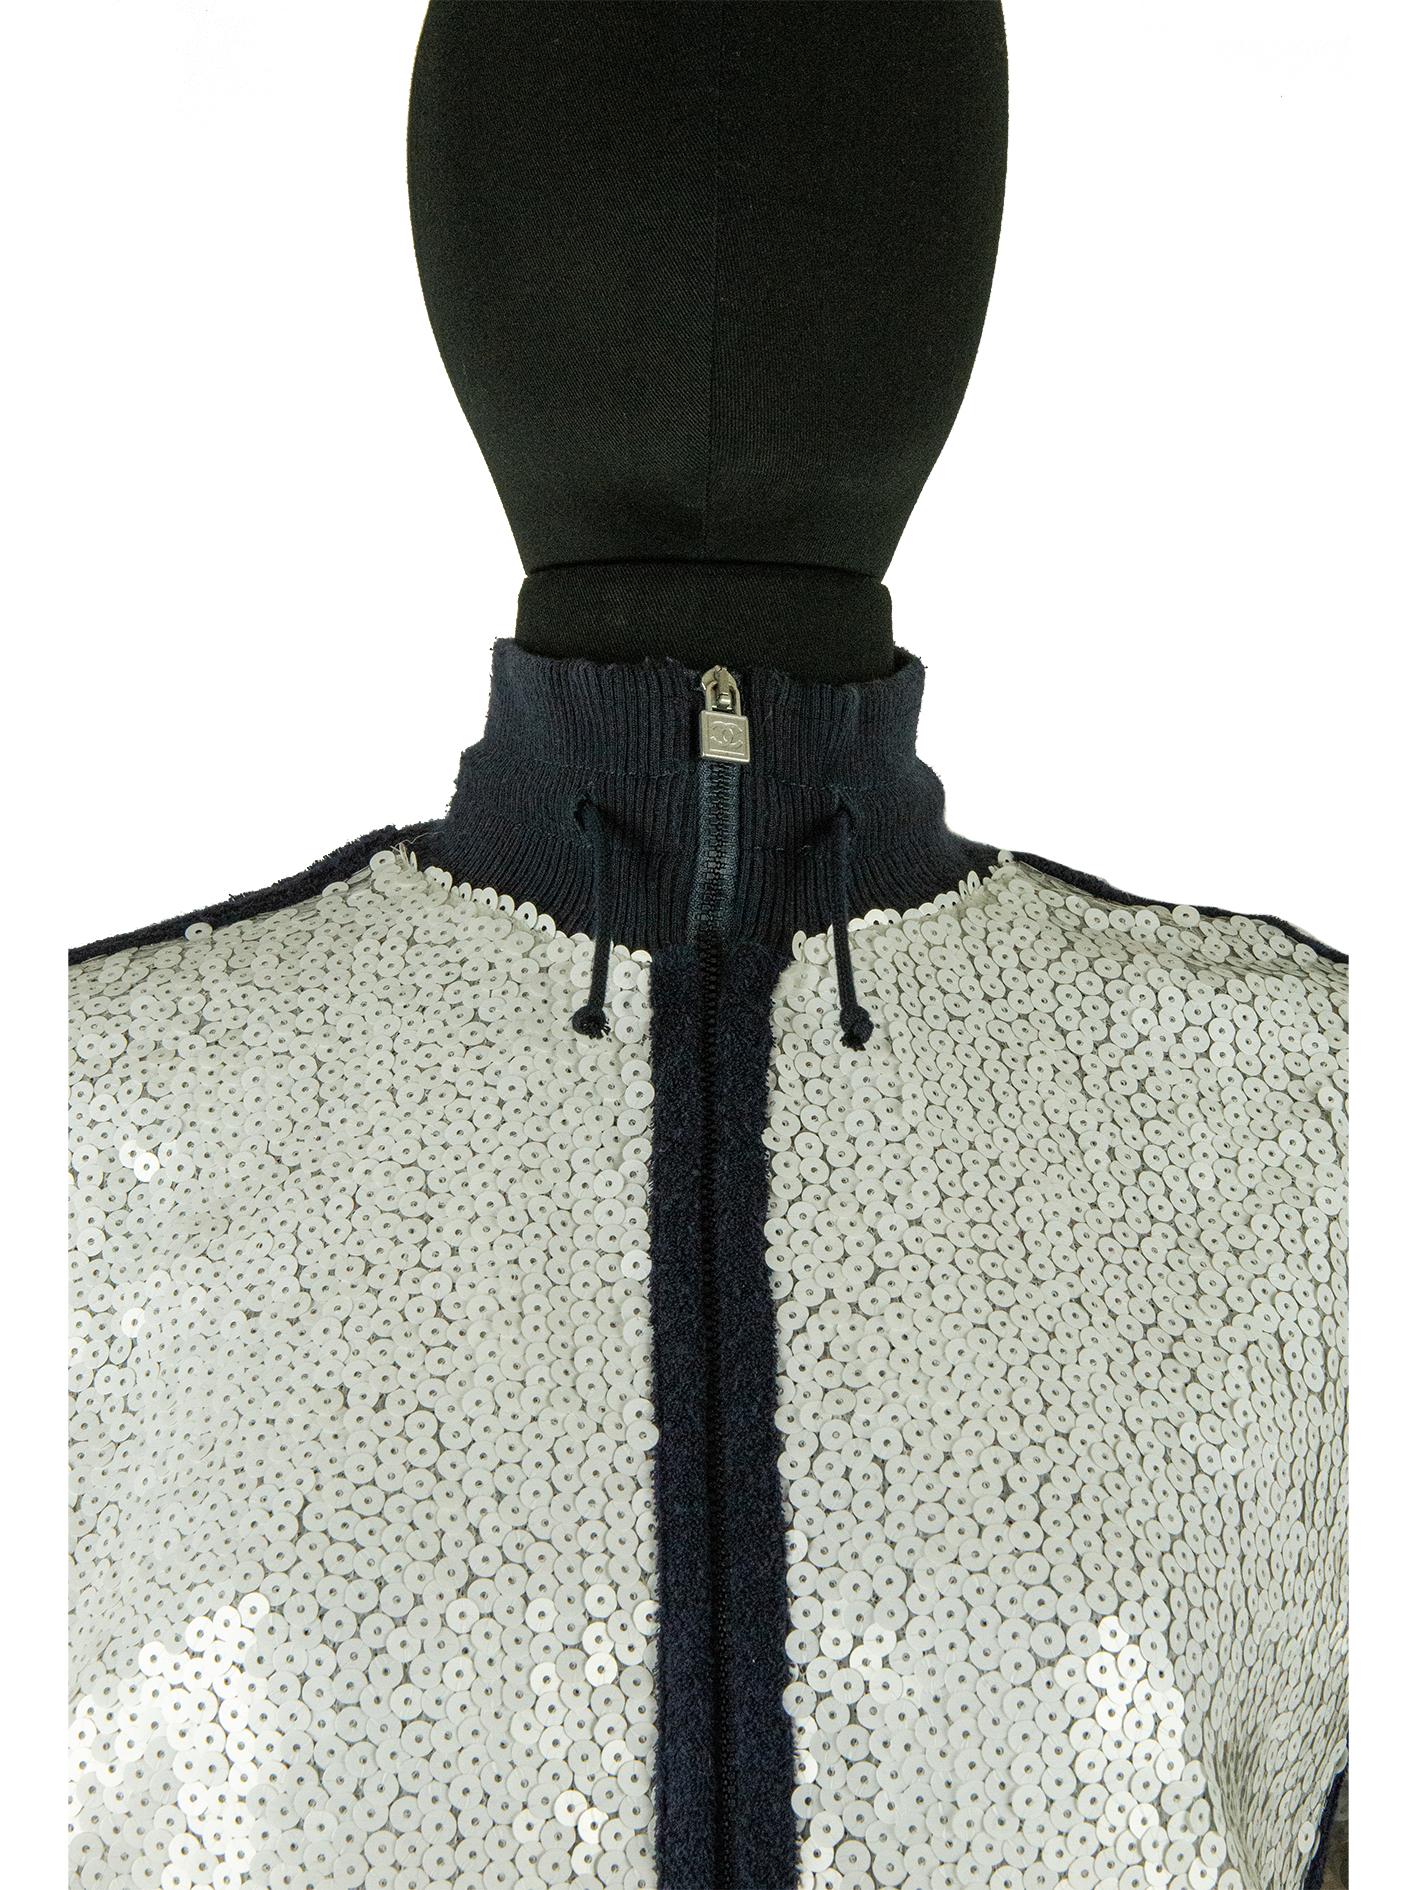 An icy white sequin-covered Chanel jacket from the cruise collection of 2008. This sporty jacket is an all-over covering of sequins in silvery white. With contrasting navy around the elasticated high neck collar, down into the zipper, into the